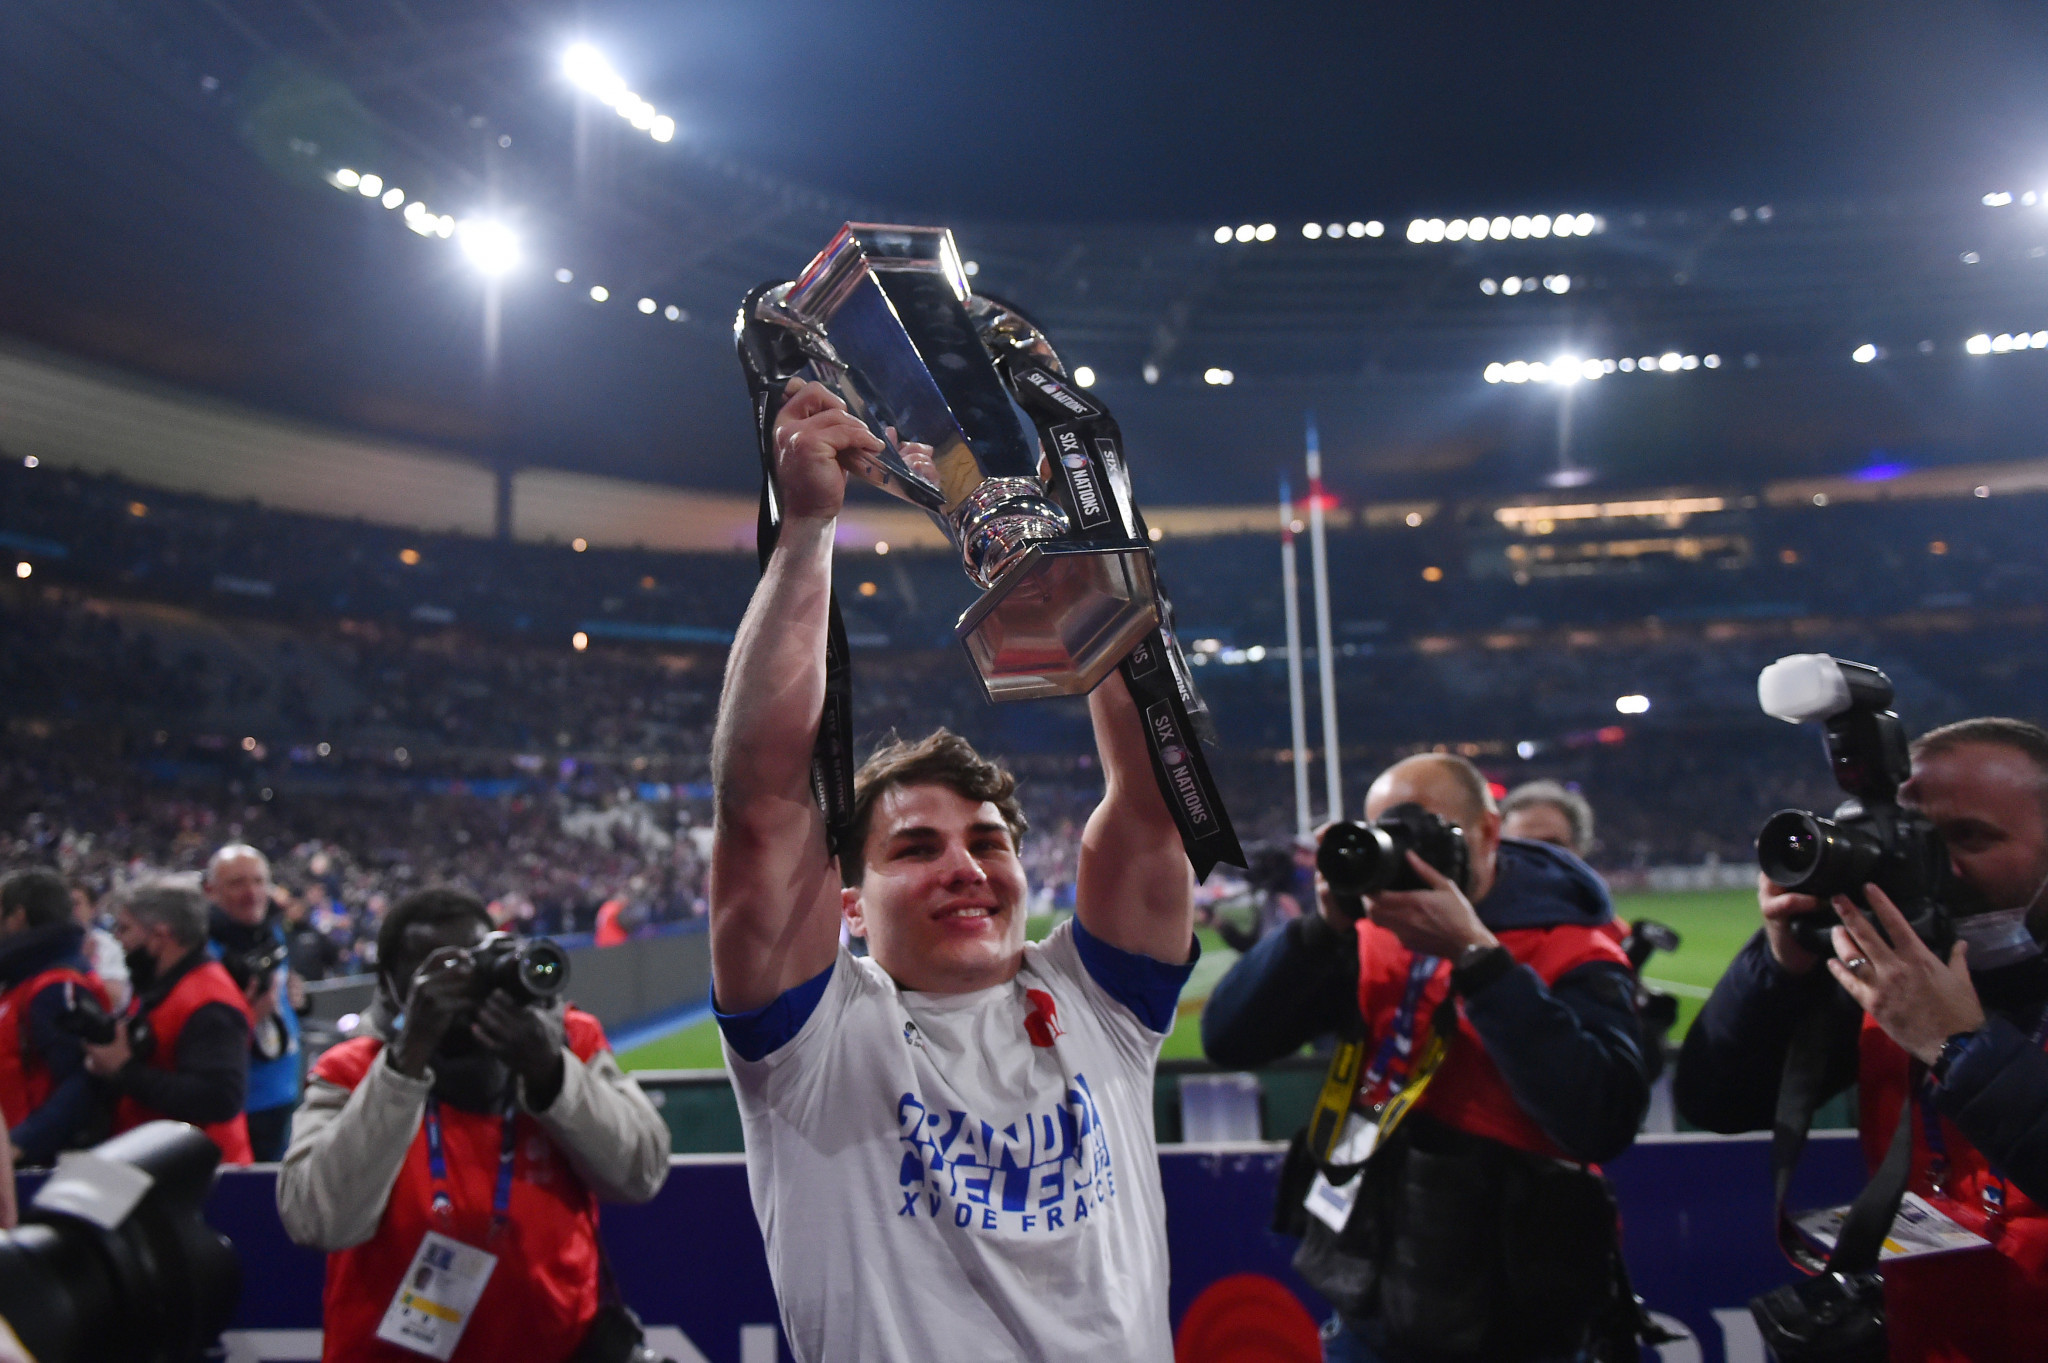 Antoine Dupont captained France to a Six Nations Grand Slam in the 15-a-side version of rugby union ©Getty Images